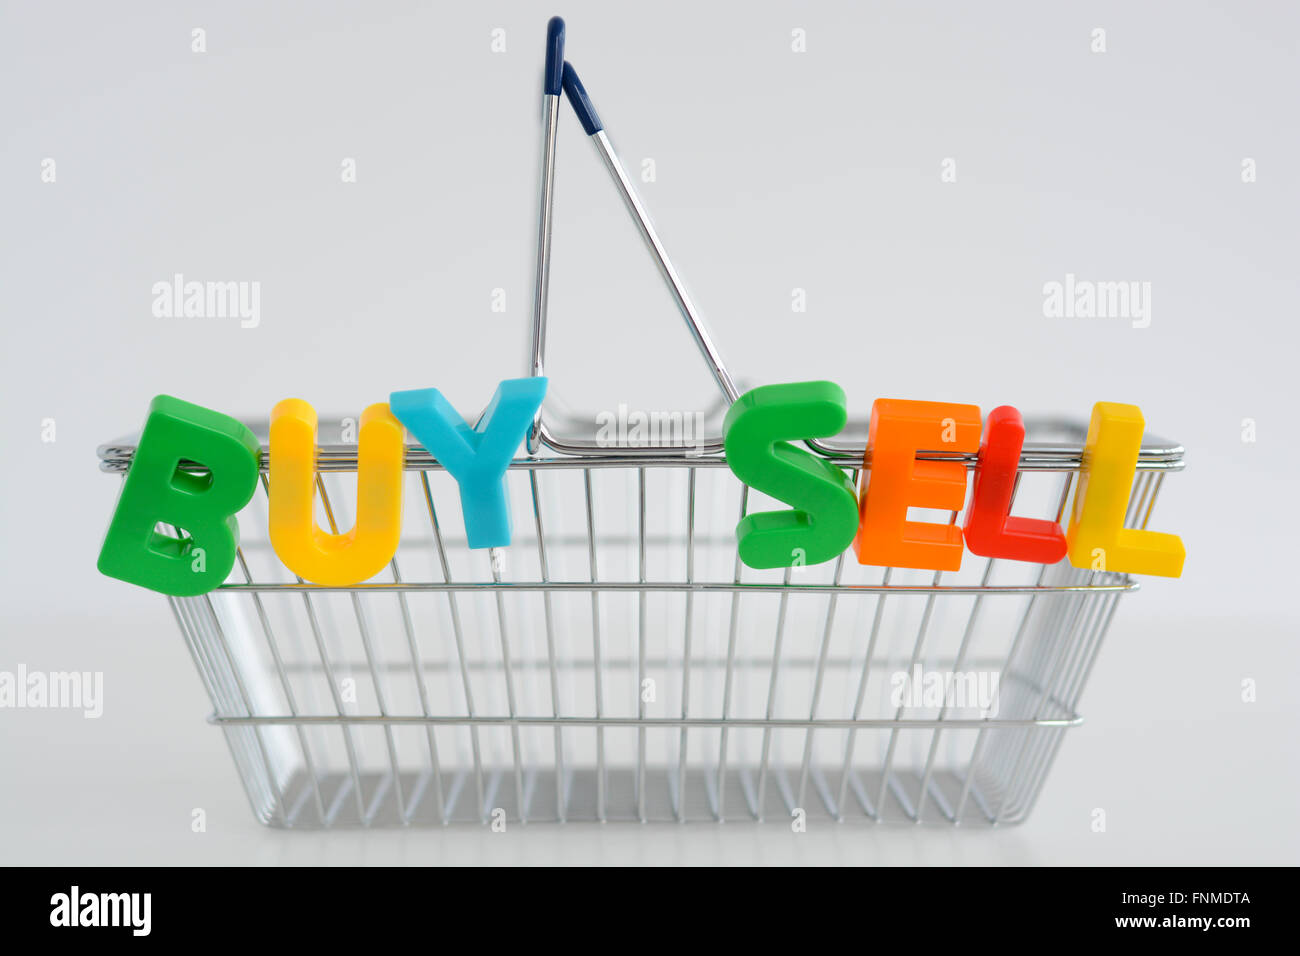 Buy and sell magnetic letters on a shopping basket Stock Photo